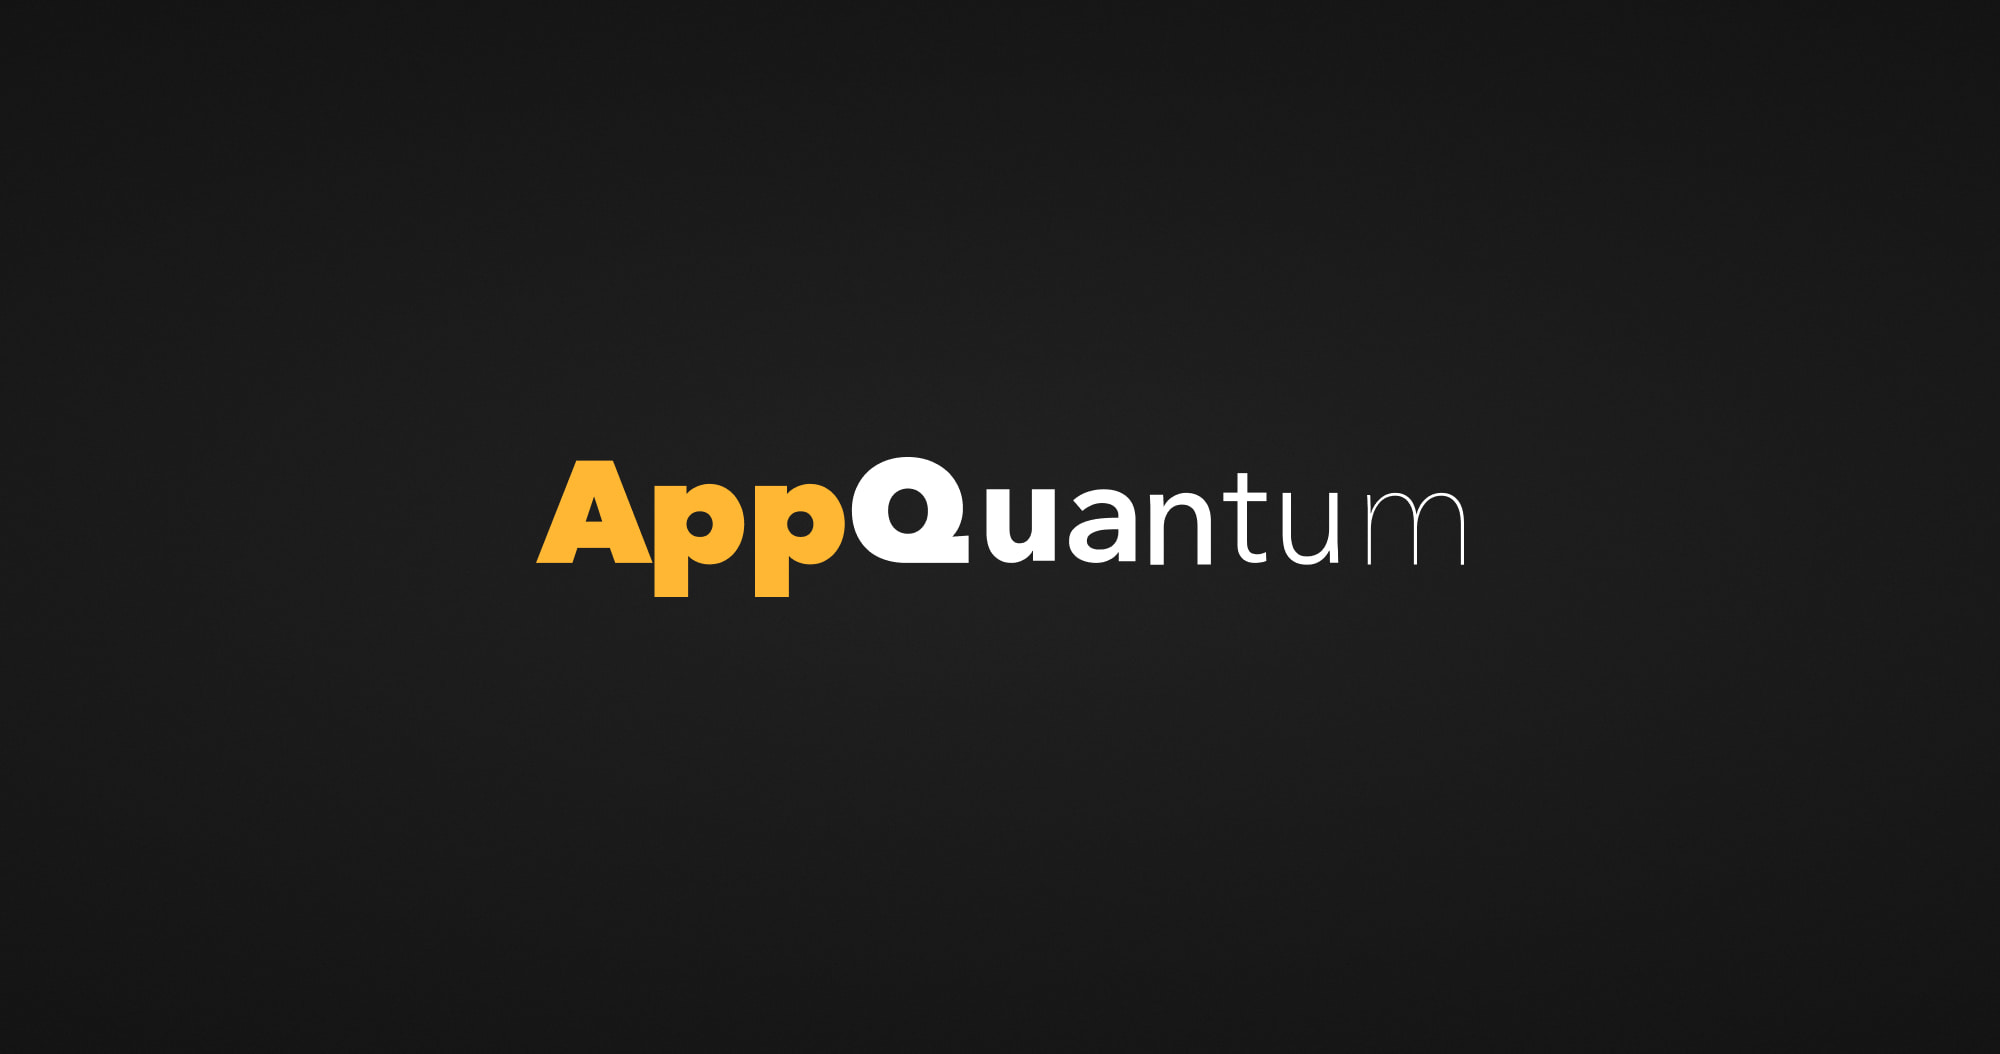 Business Acceleration Program for Mobile Game Developers by AppQuantum Publishing